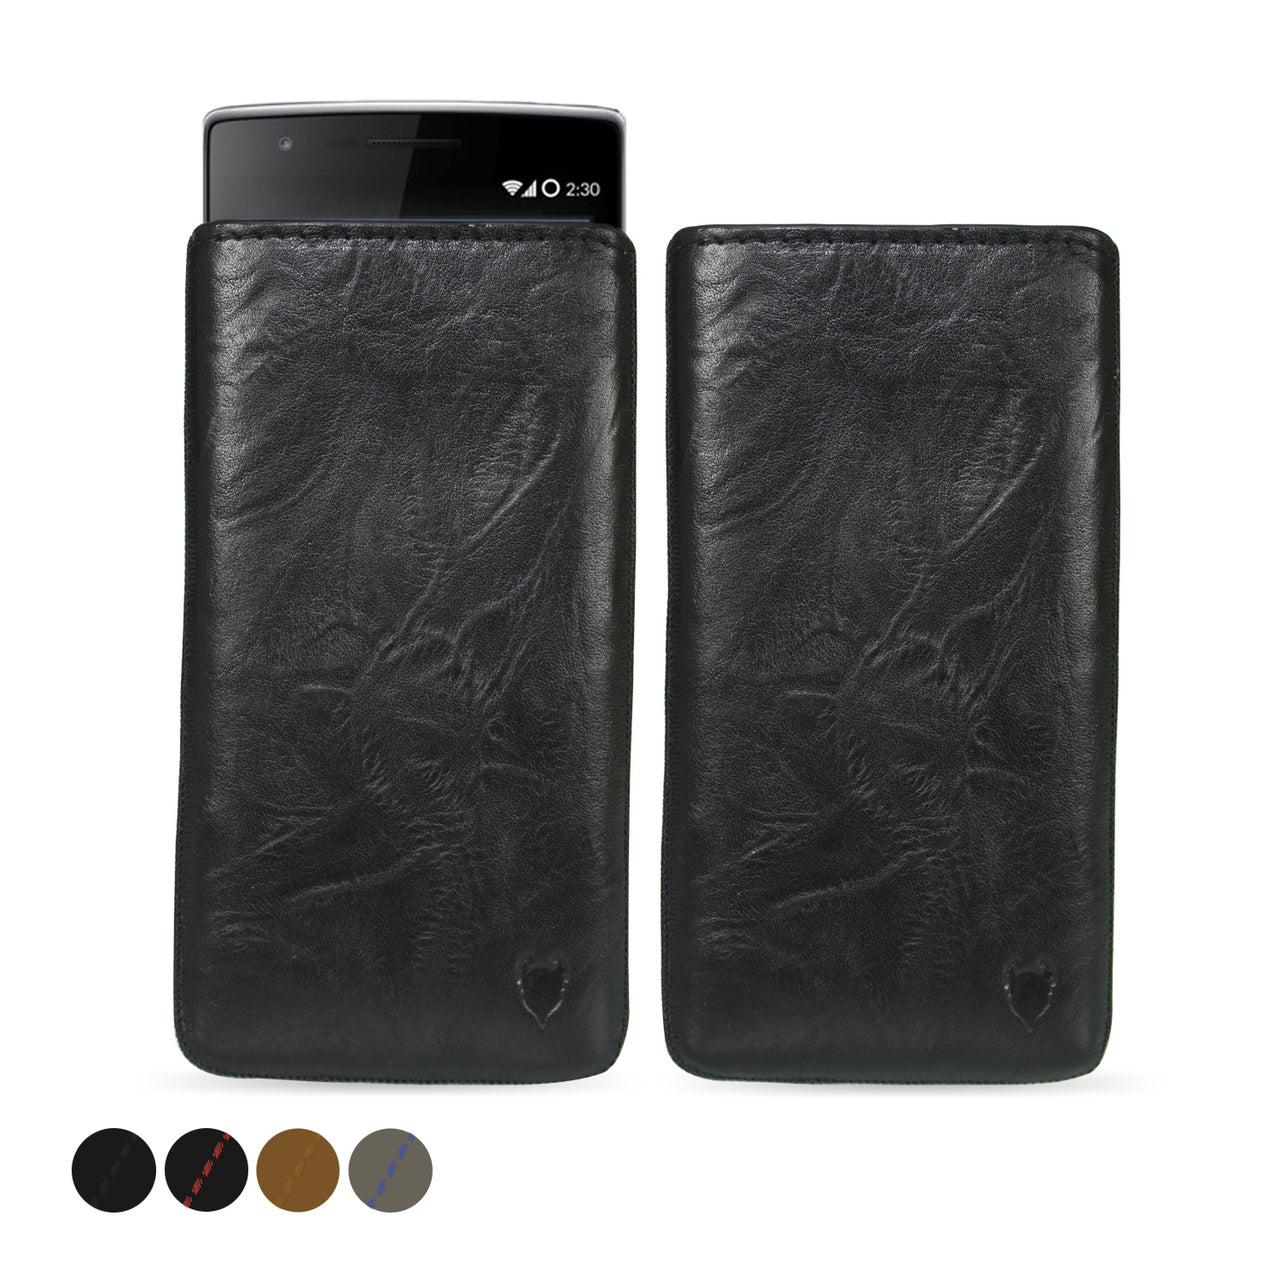 Nokia 6 (2017) Genuine Leather Pouch Sleeve Case | Artisanpouch